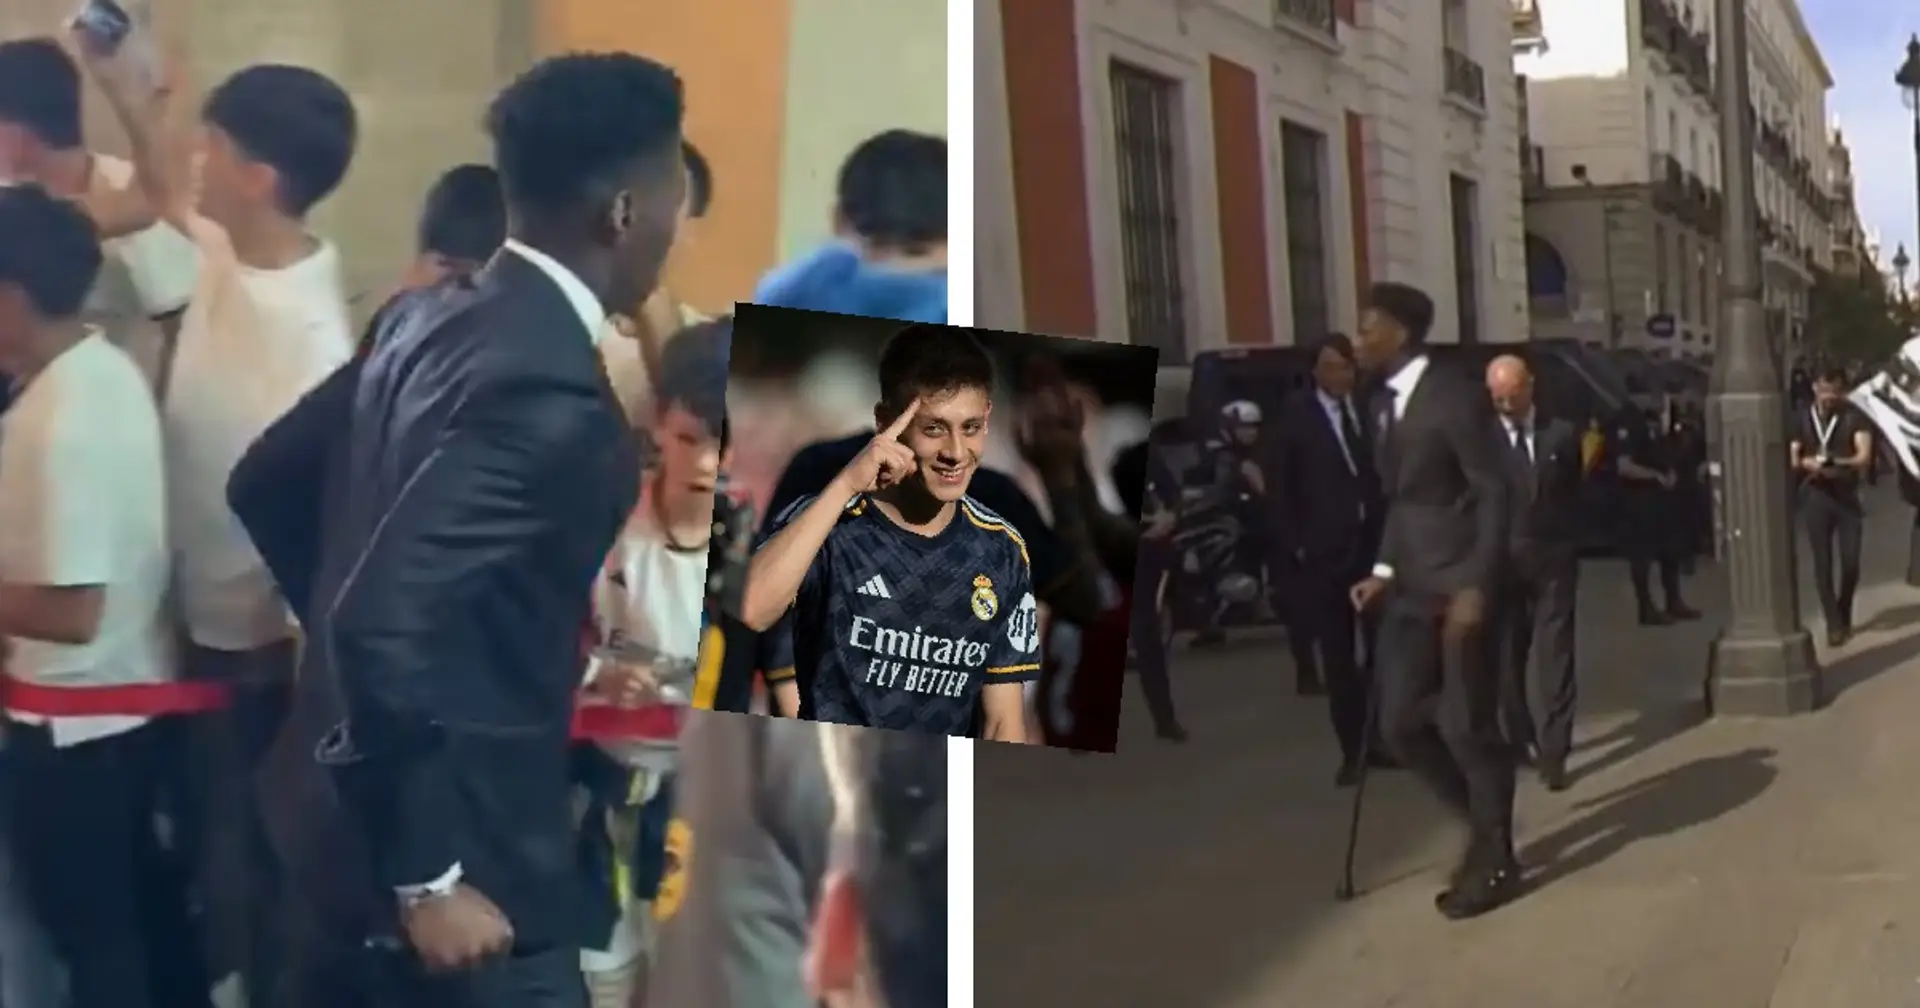 SPOTTED: Tchouameni on crutches during La Liga title celebrations - Guler did something special